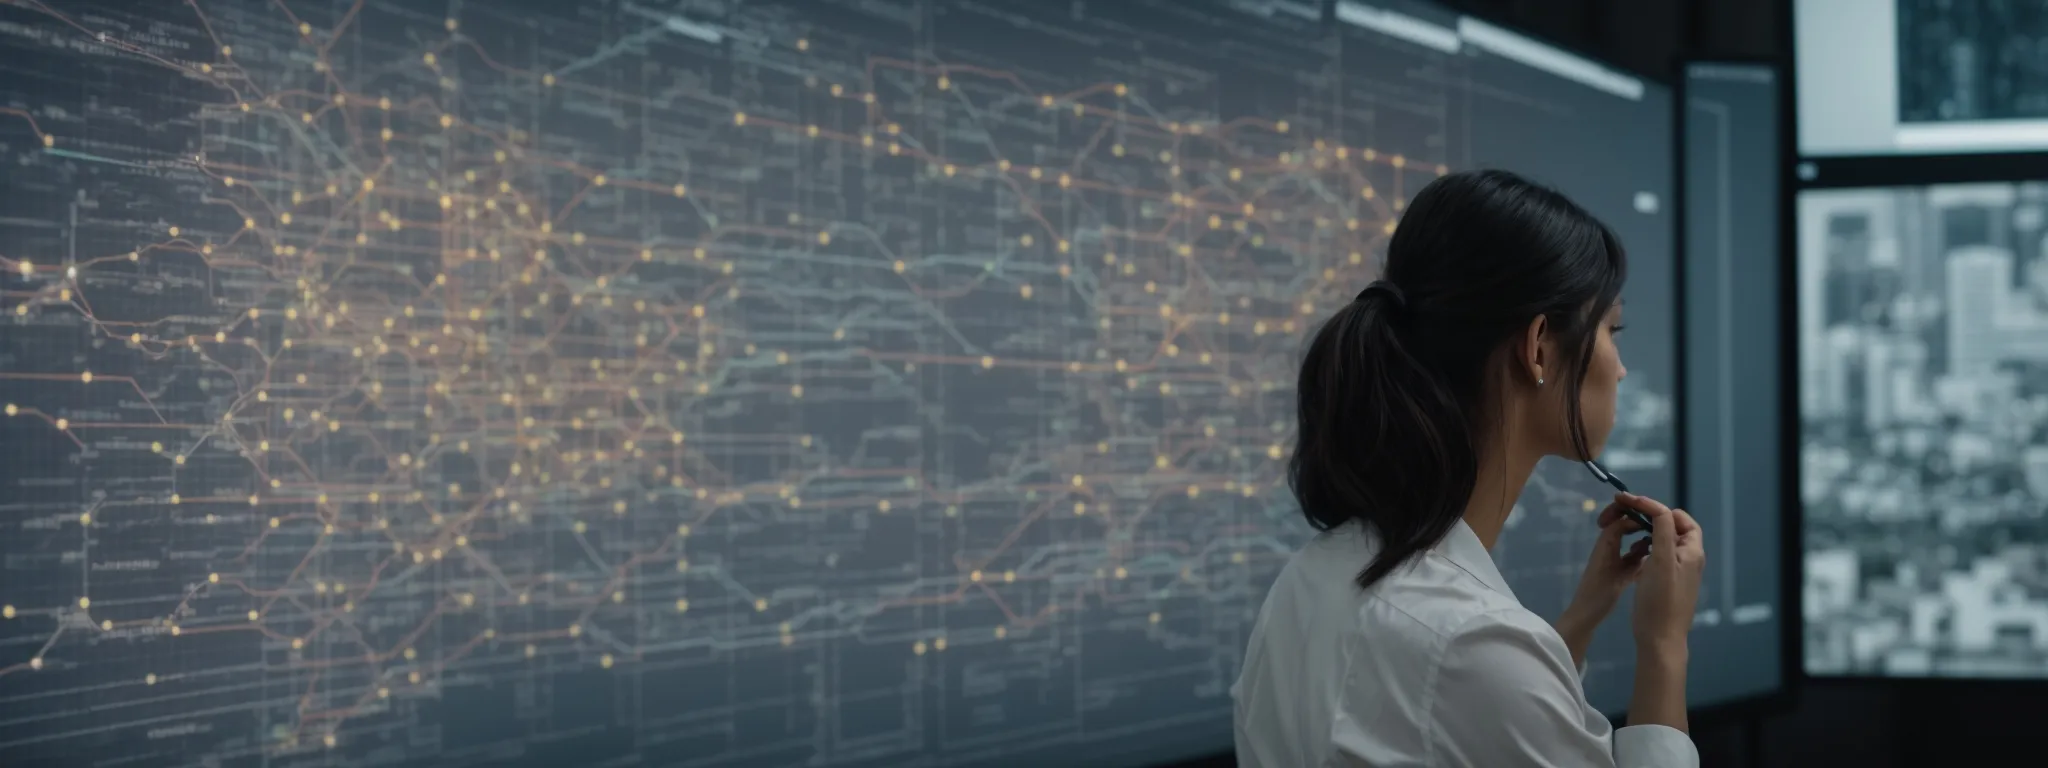 a person analyzing complex network diagrams on a large interactive display within a modern office setting.